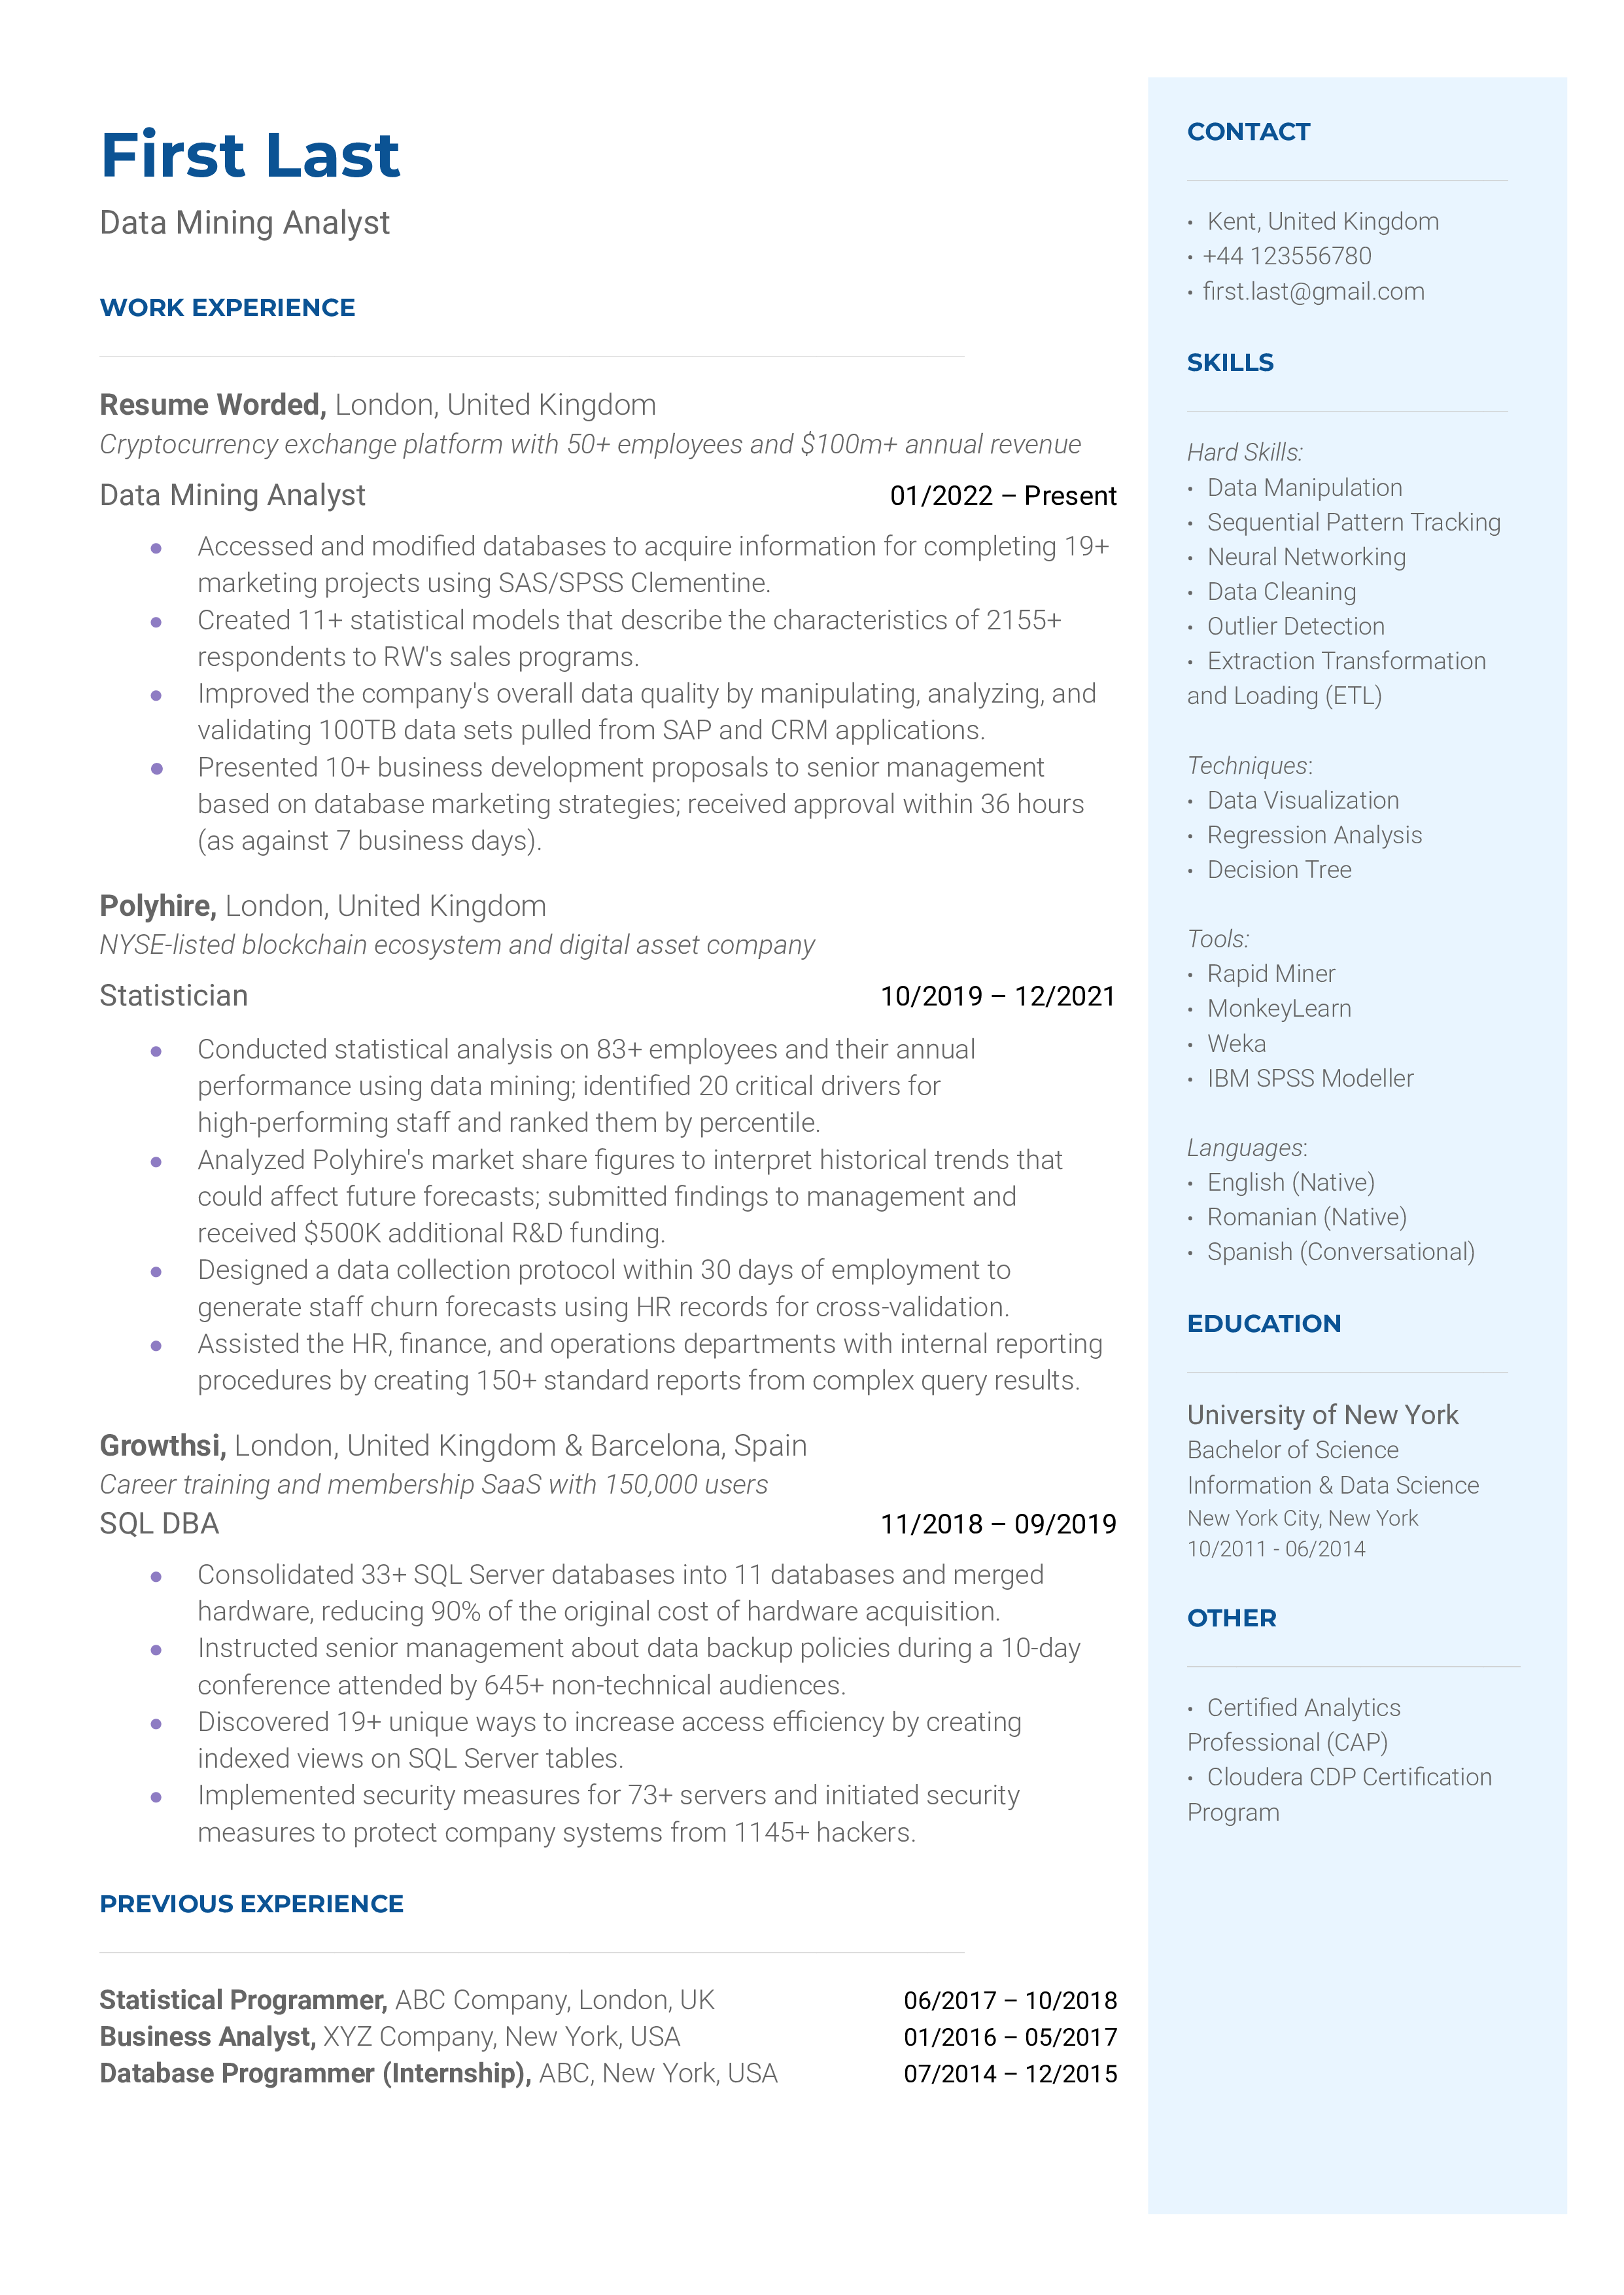 A data mining analyst resume template including in-demand industry skills.